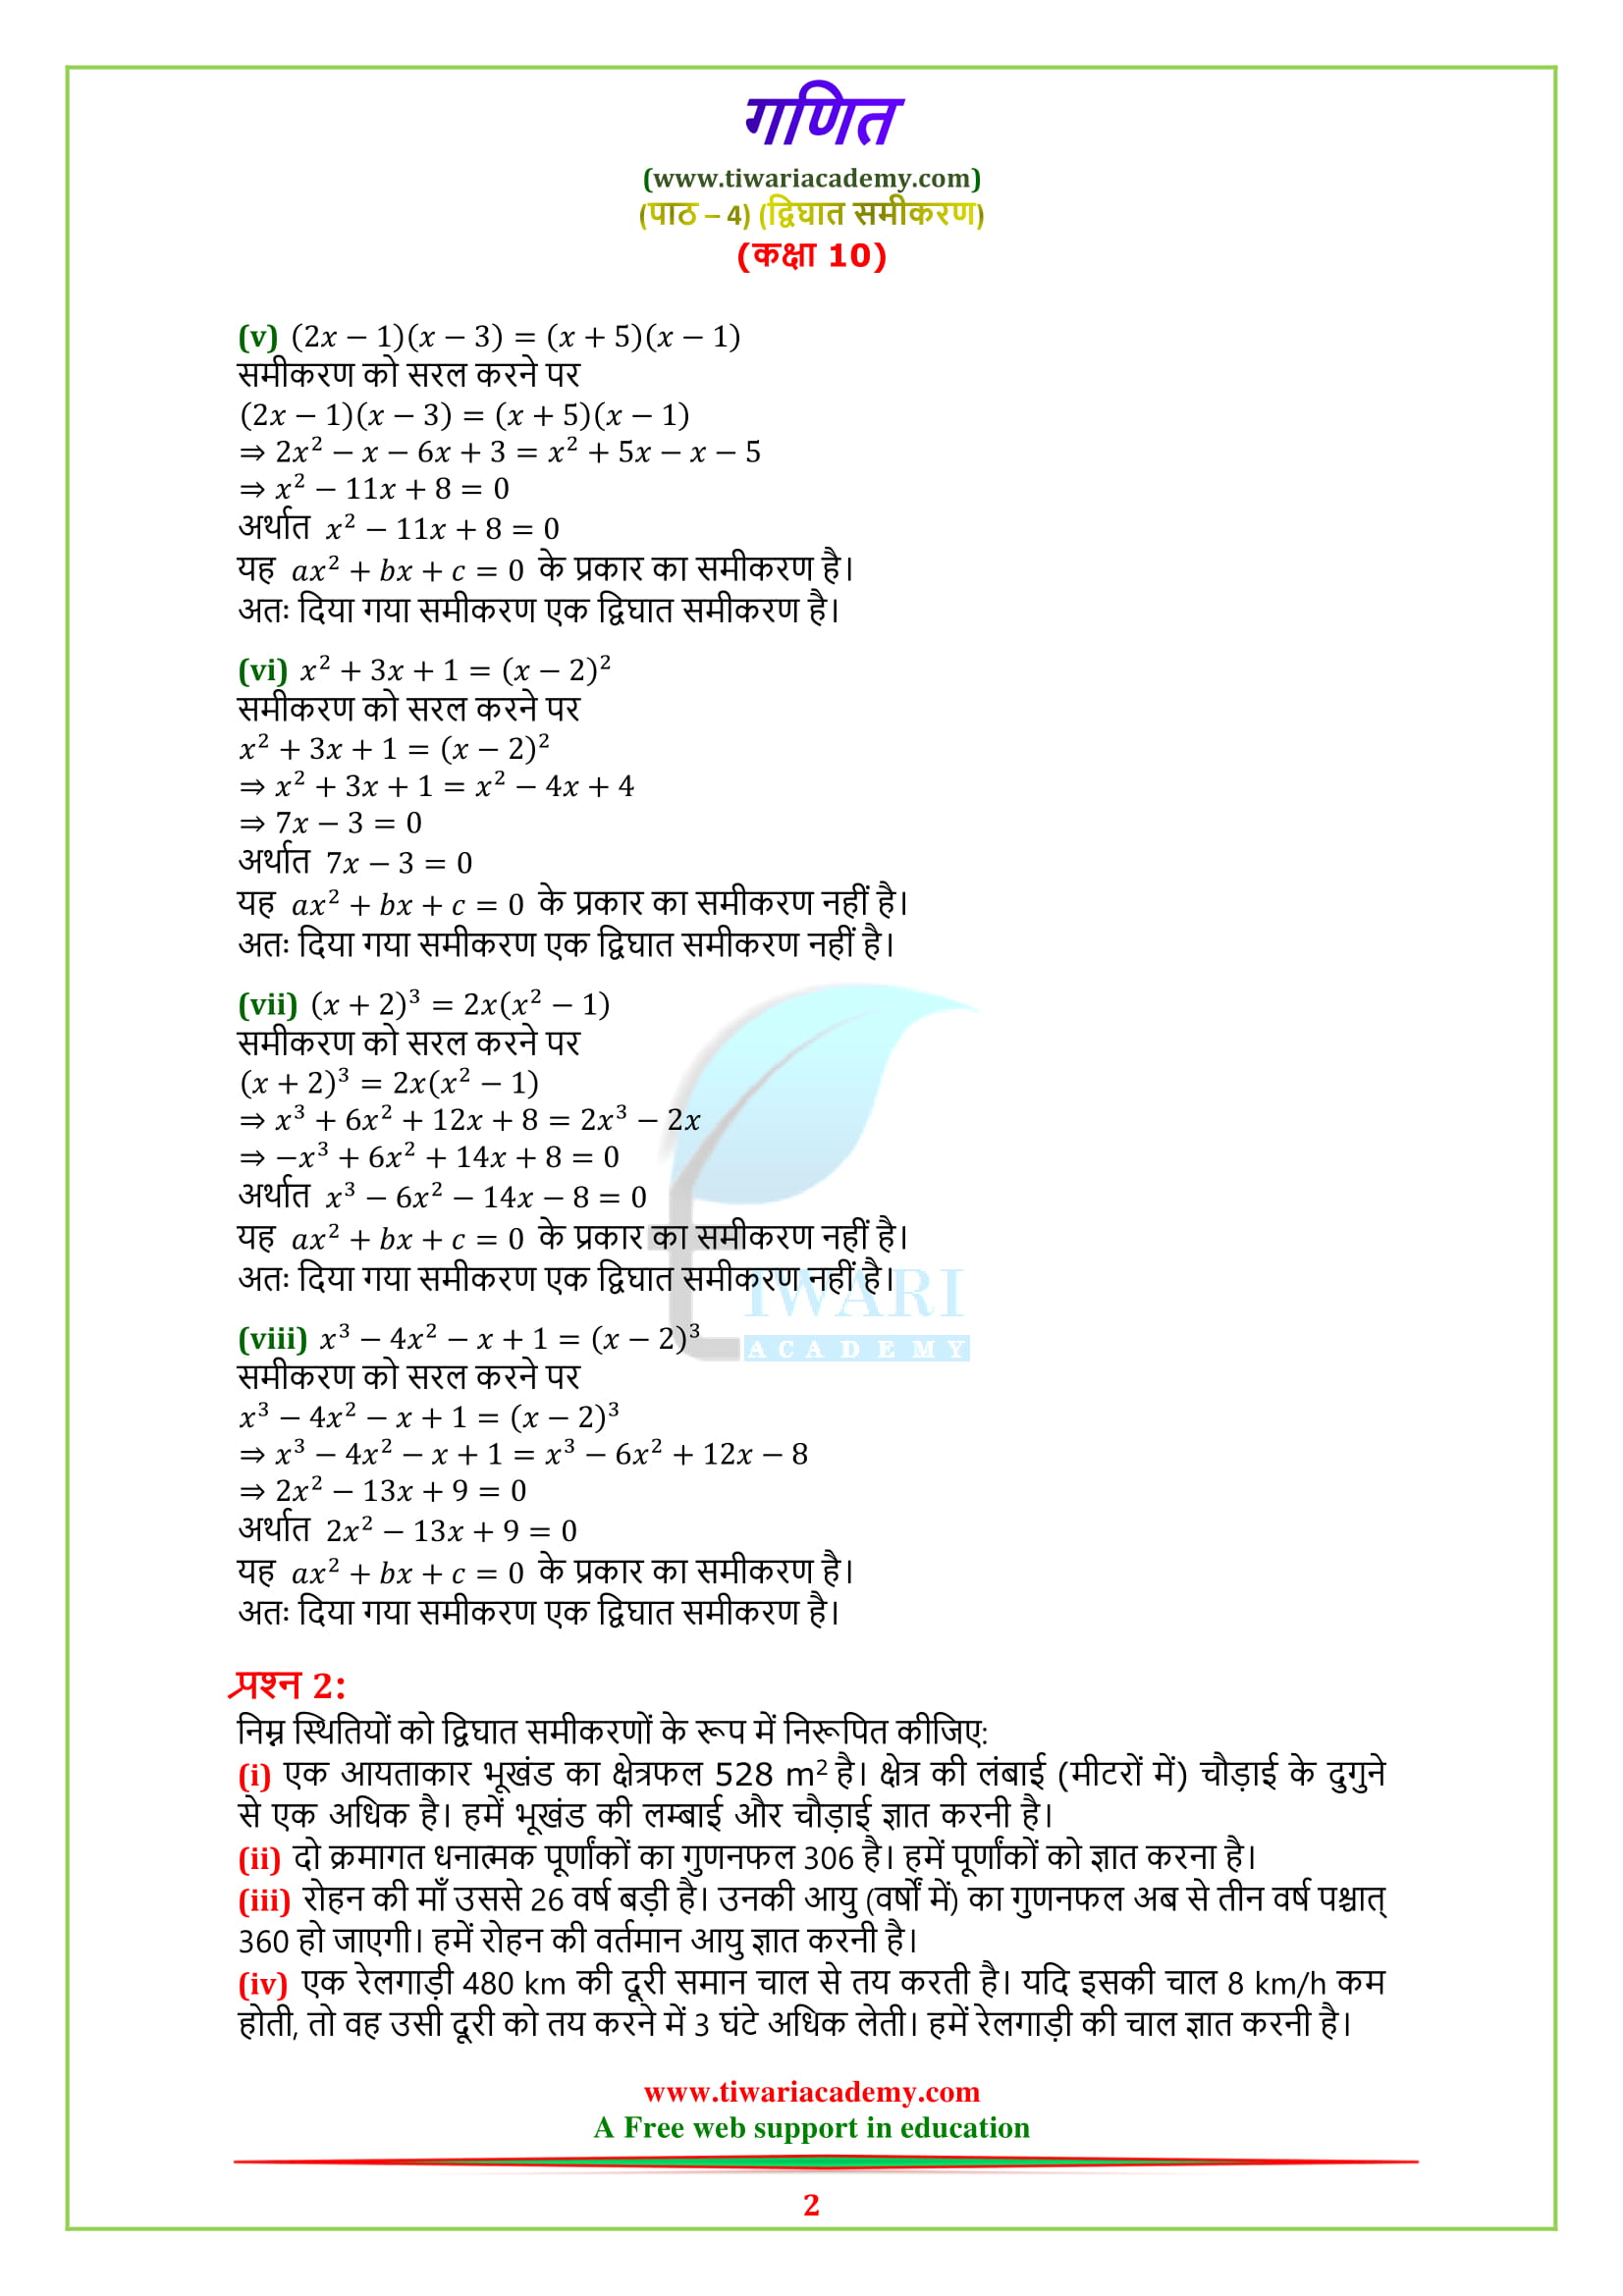 NCERT Solutions for class 10 Maths chapter 4 Exercise 4.1 in Hindi pdf